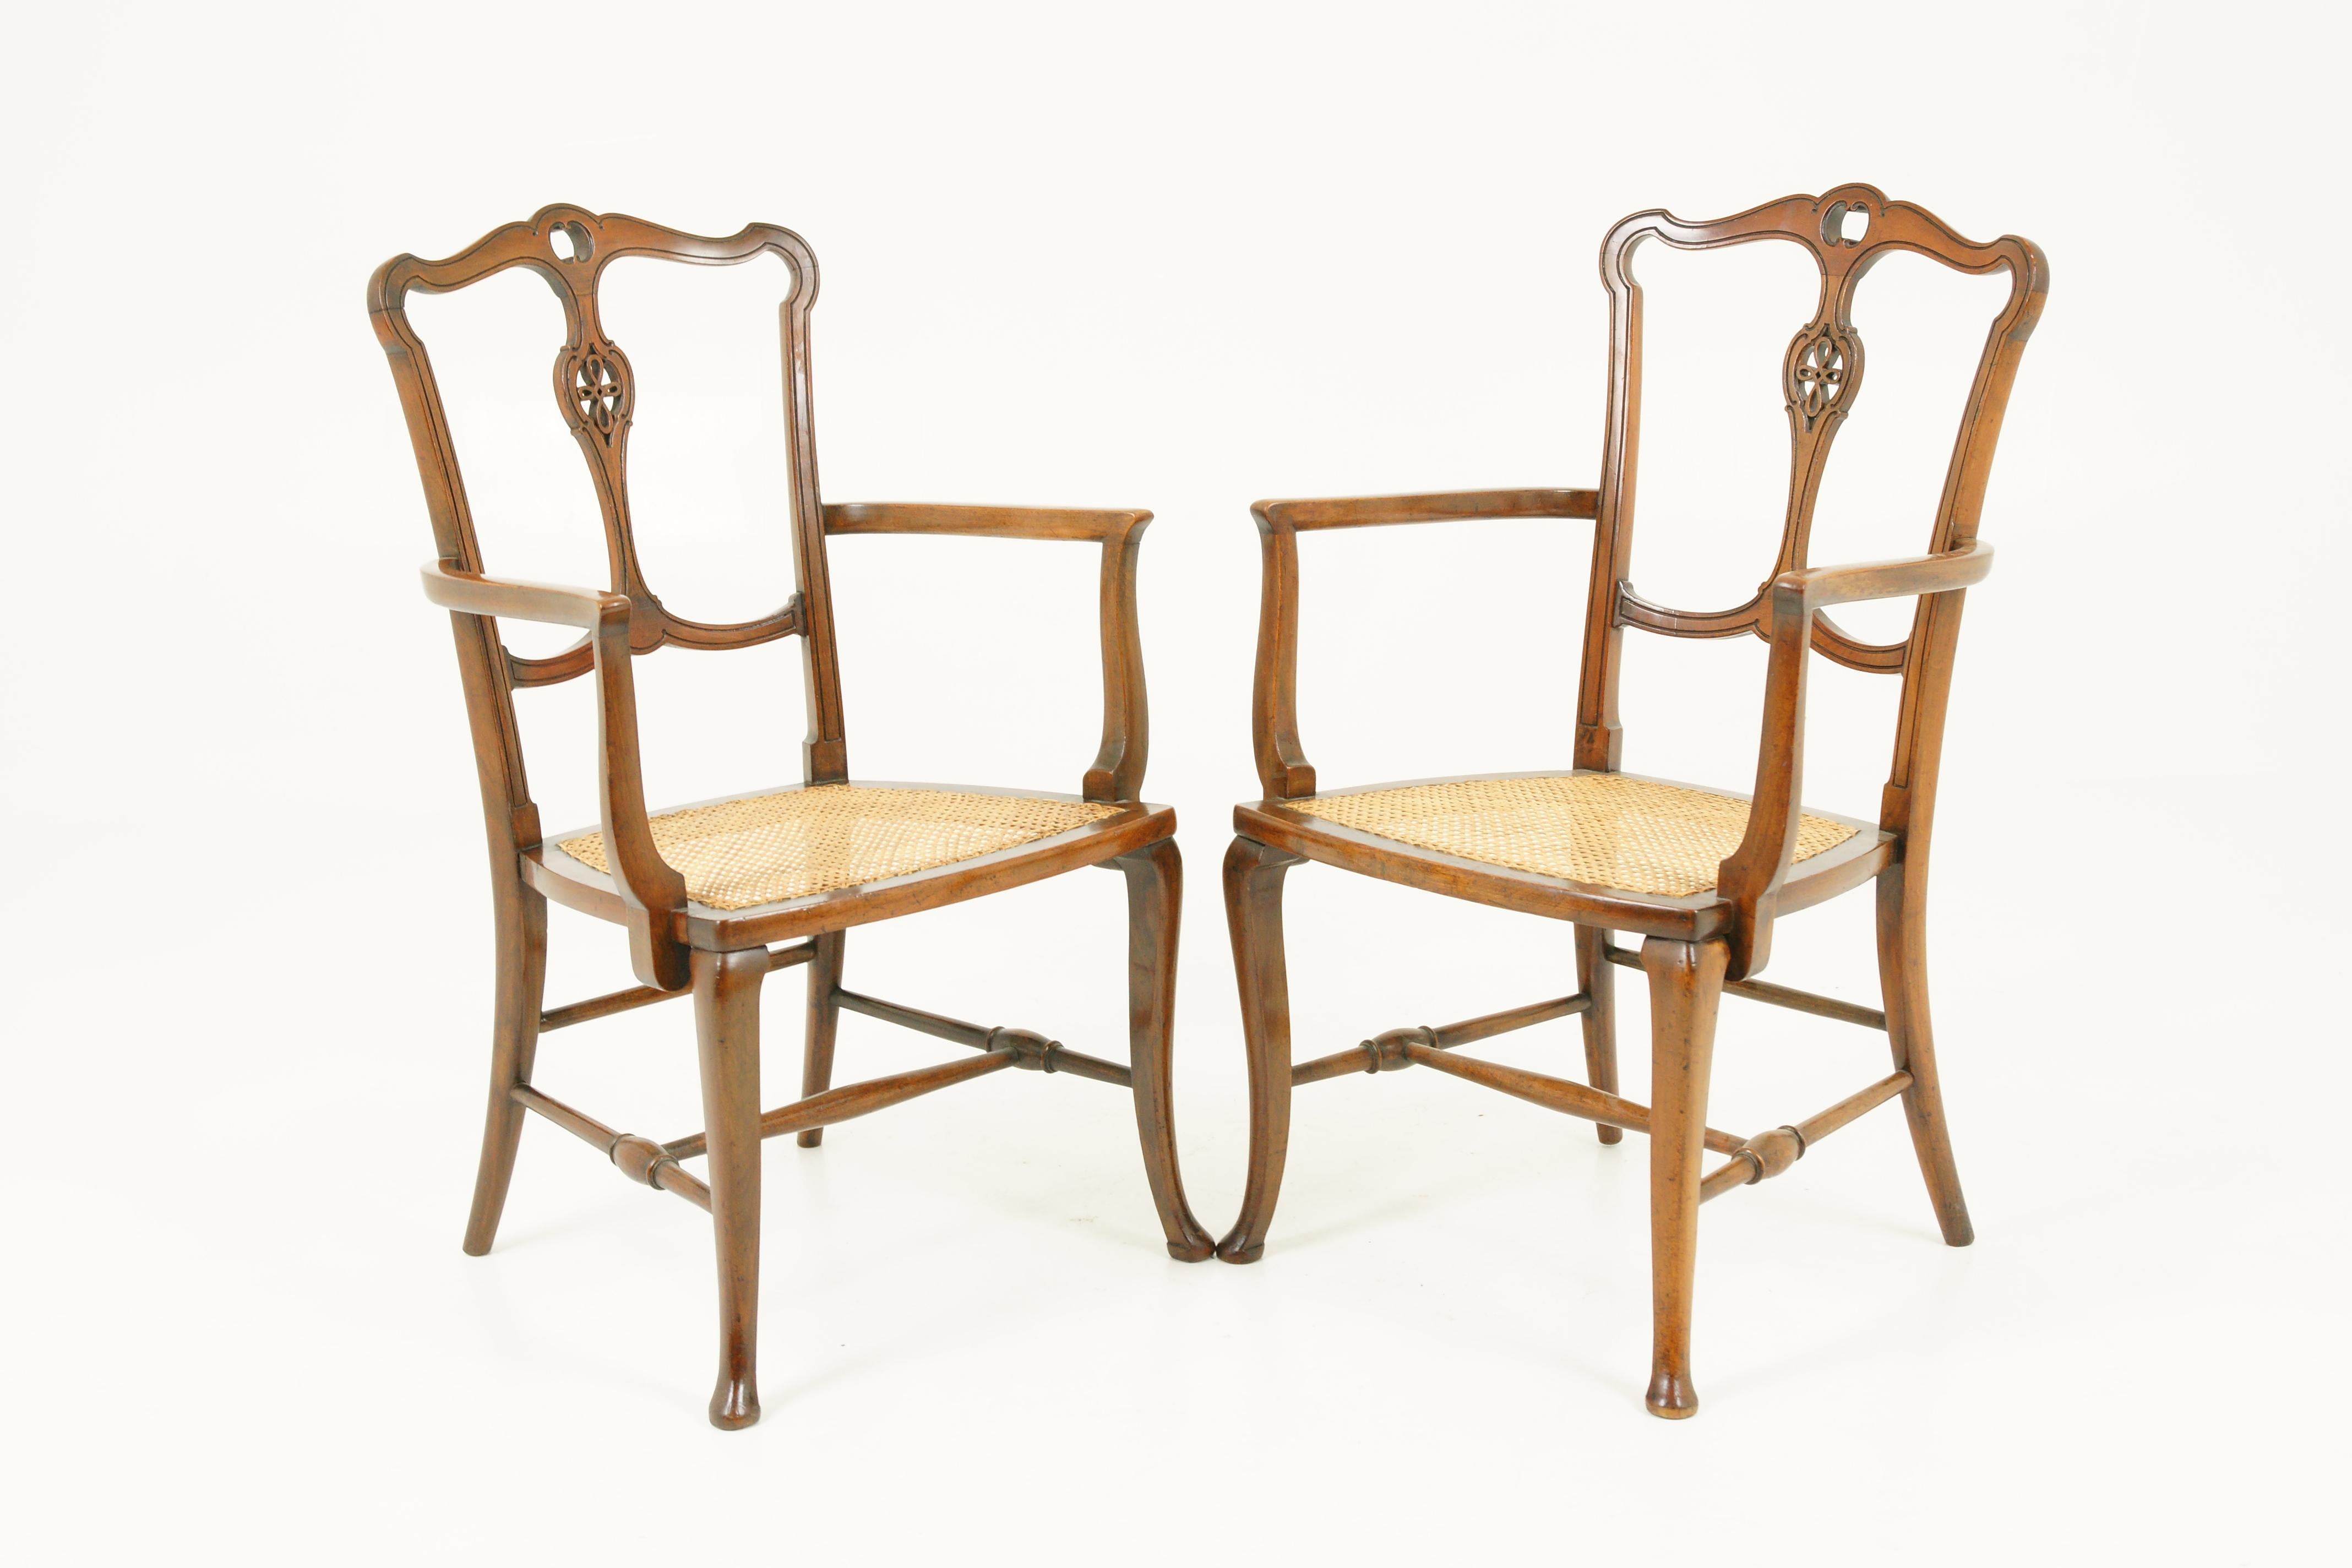 Antique Walnut Armchairs, Pair of Armchairs, Caned Seats, Scotland 1920, B1700 6